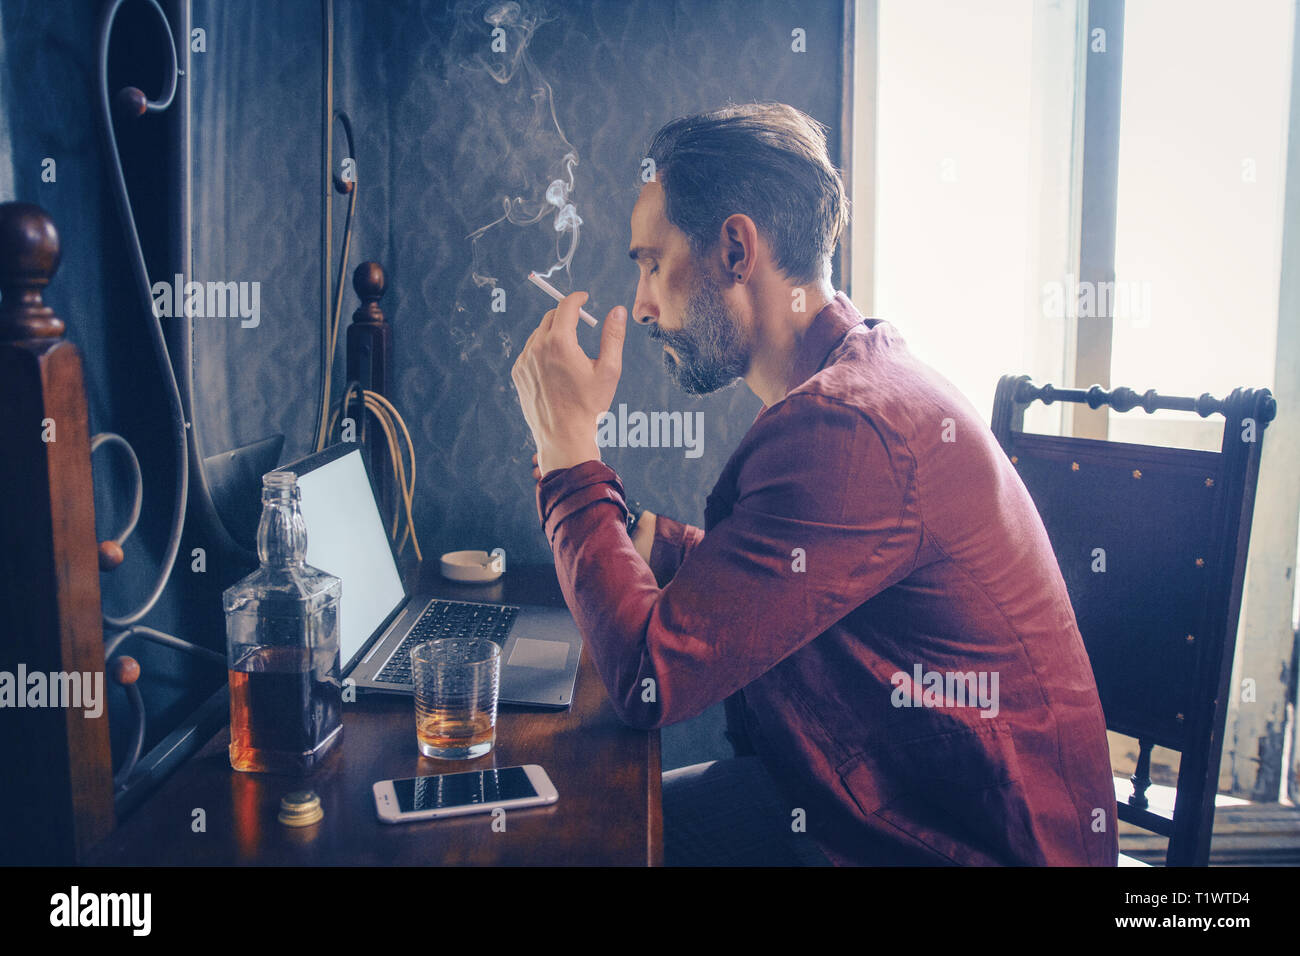 Handsome man works on his laptop smoking and drinking Stock Photo